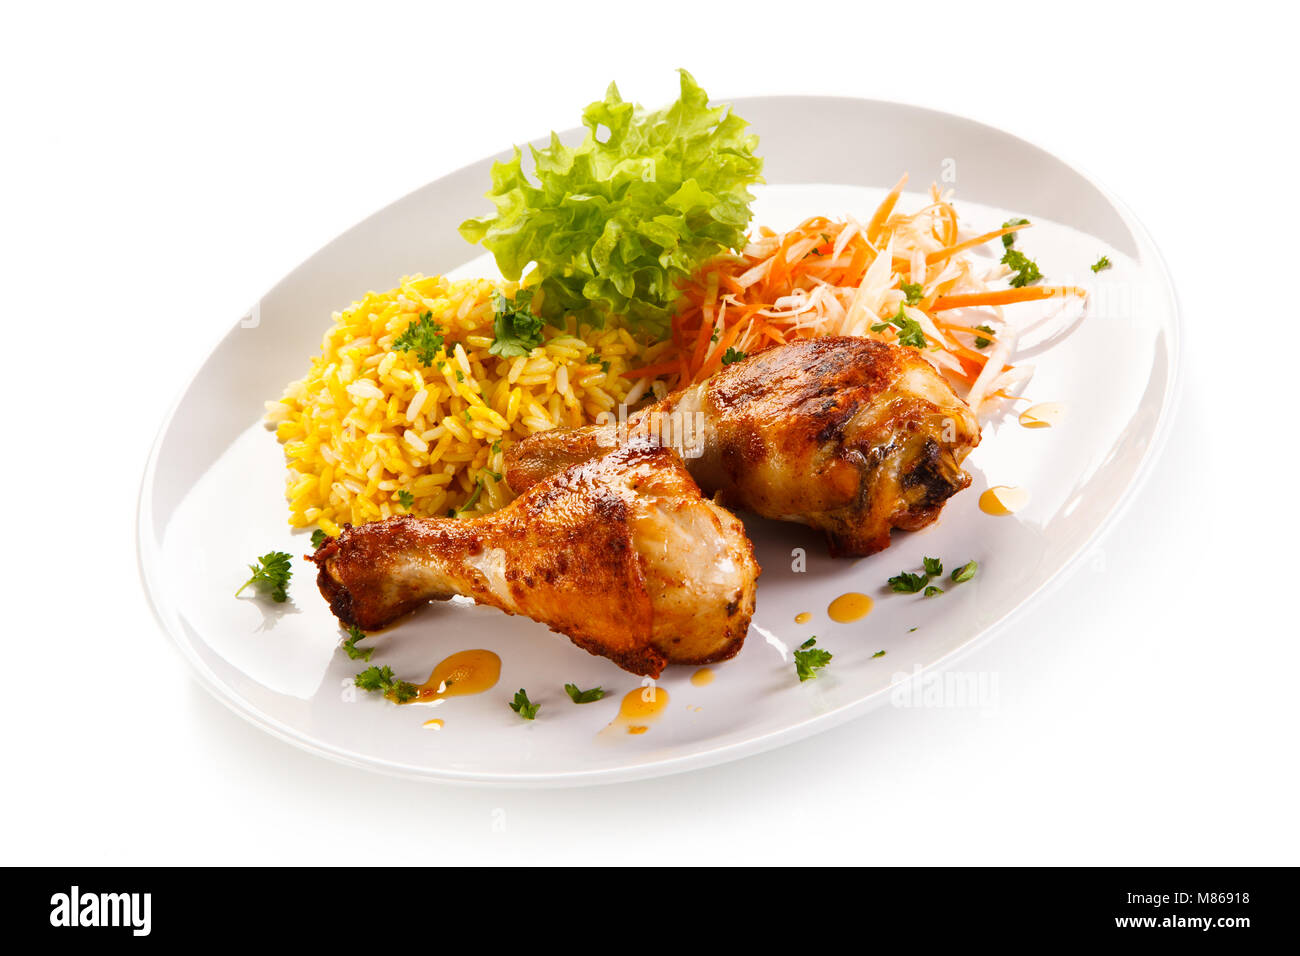 Roasted chicken drumsticks white rice and vegetables Stock Photo